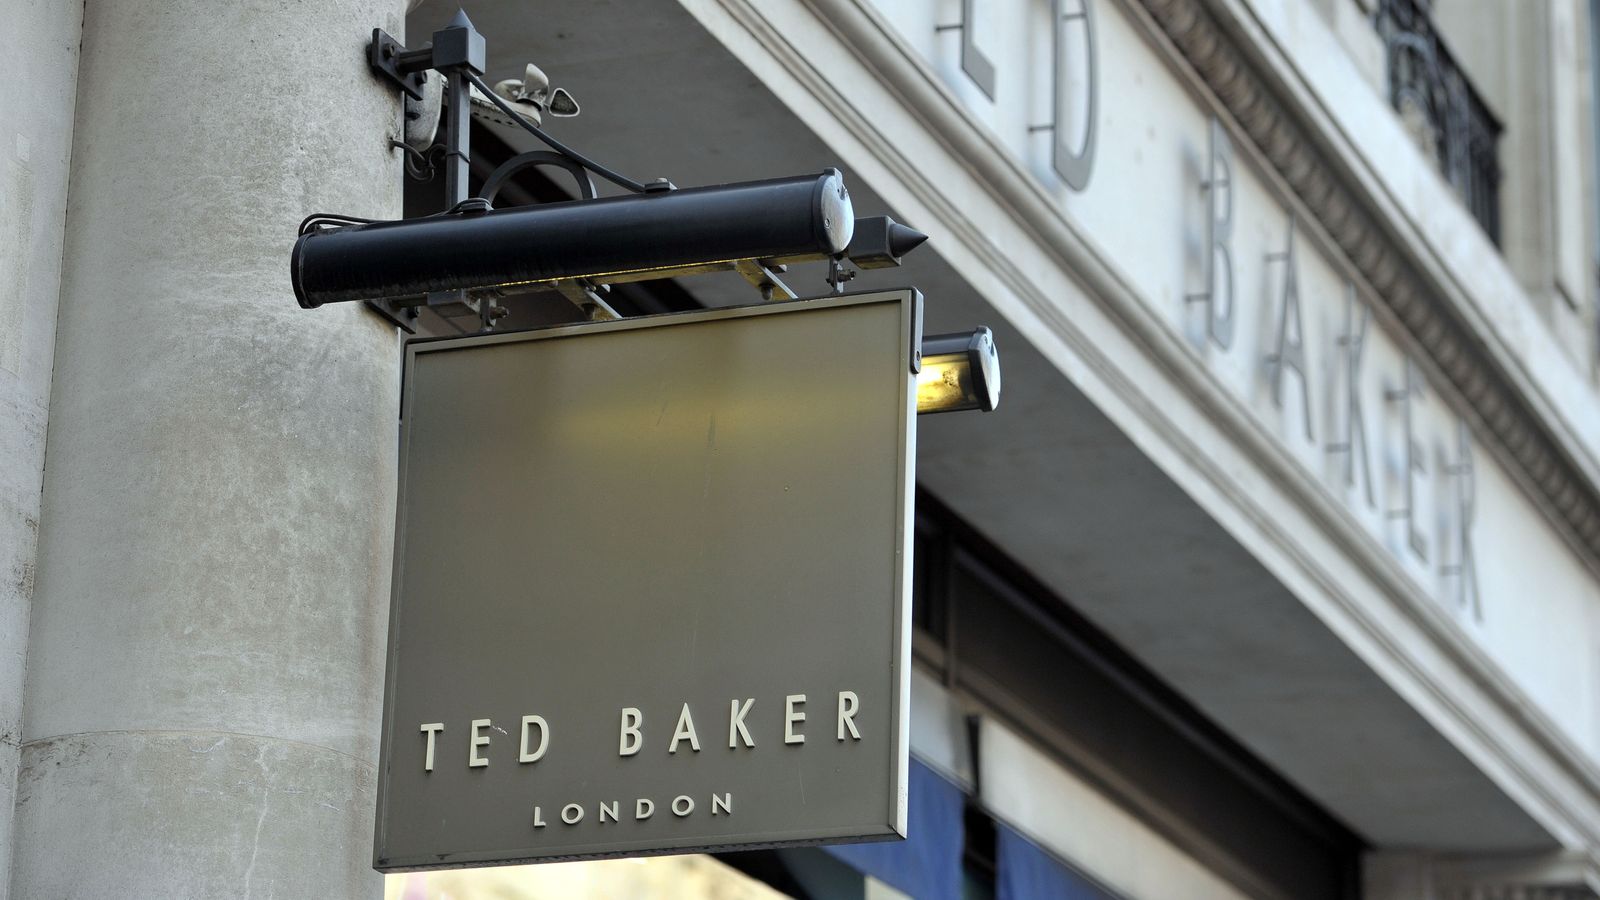 Hundreds of jobs at risk as Ted Baker calls in administrators